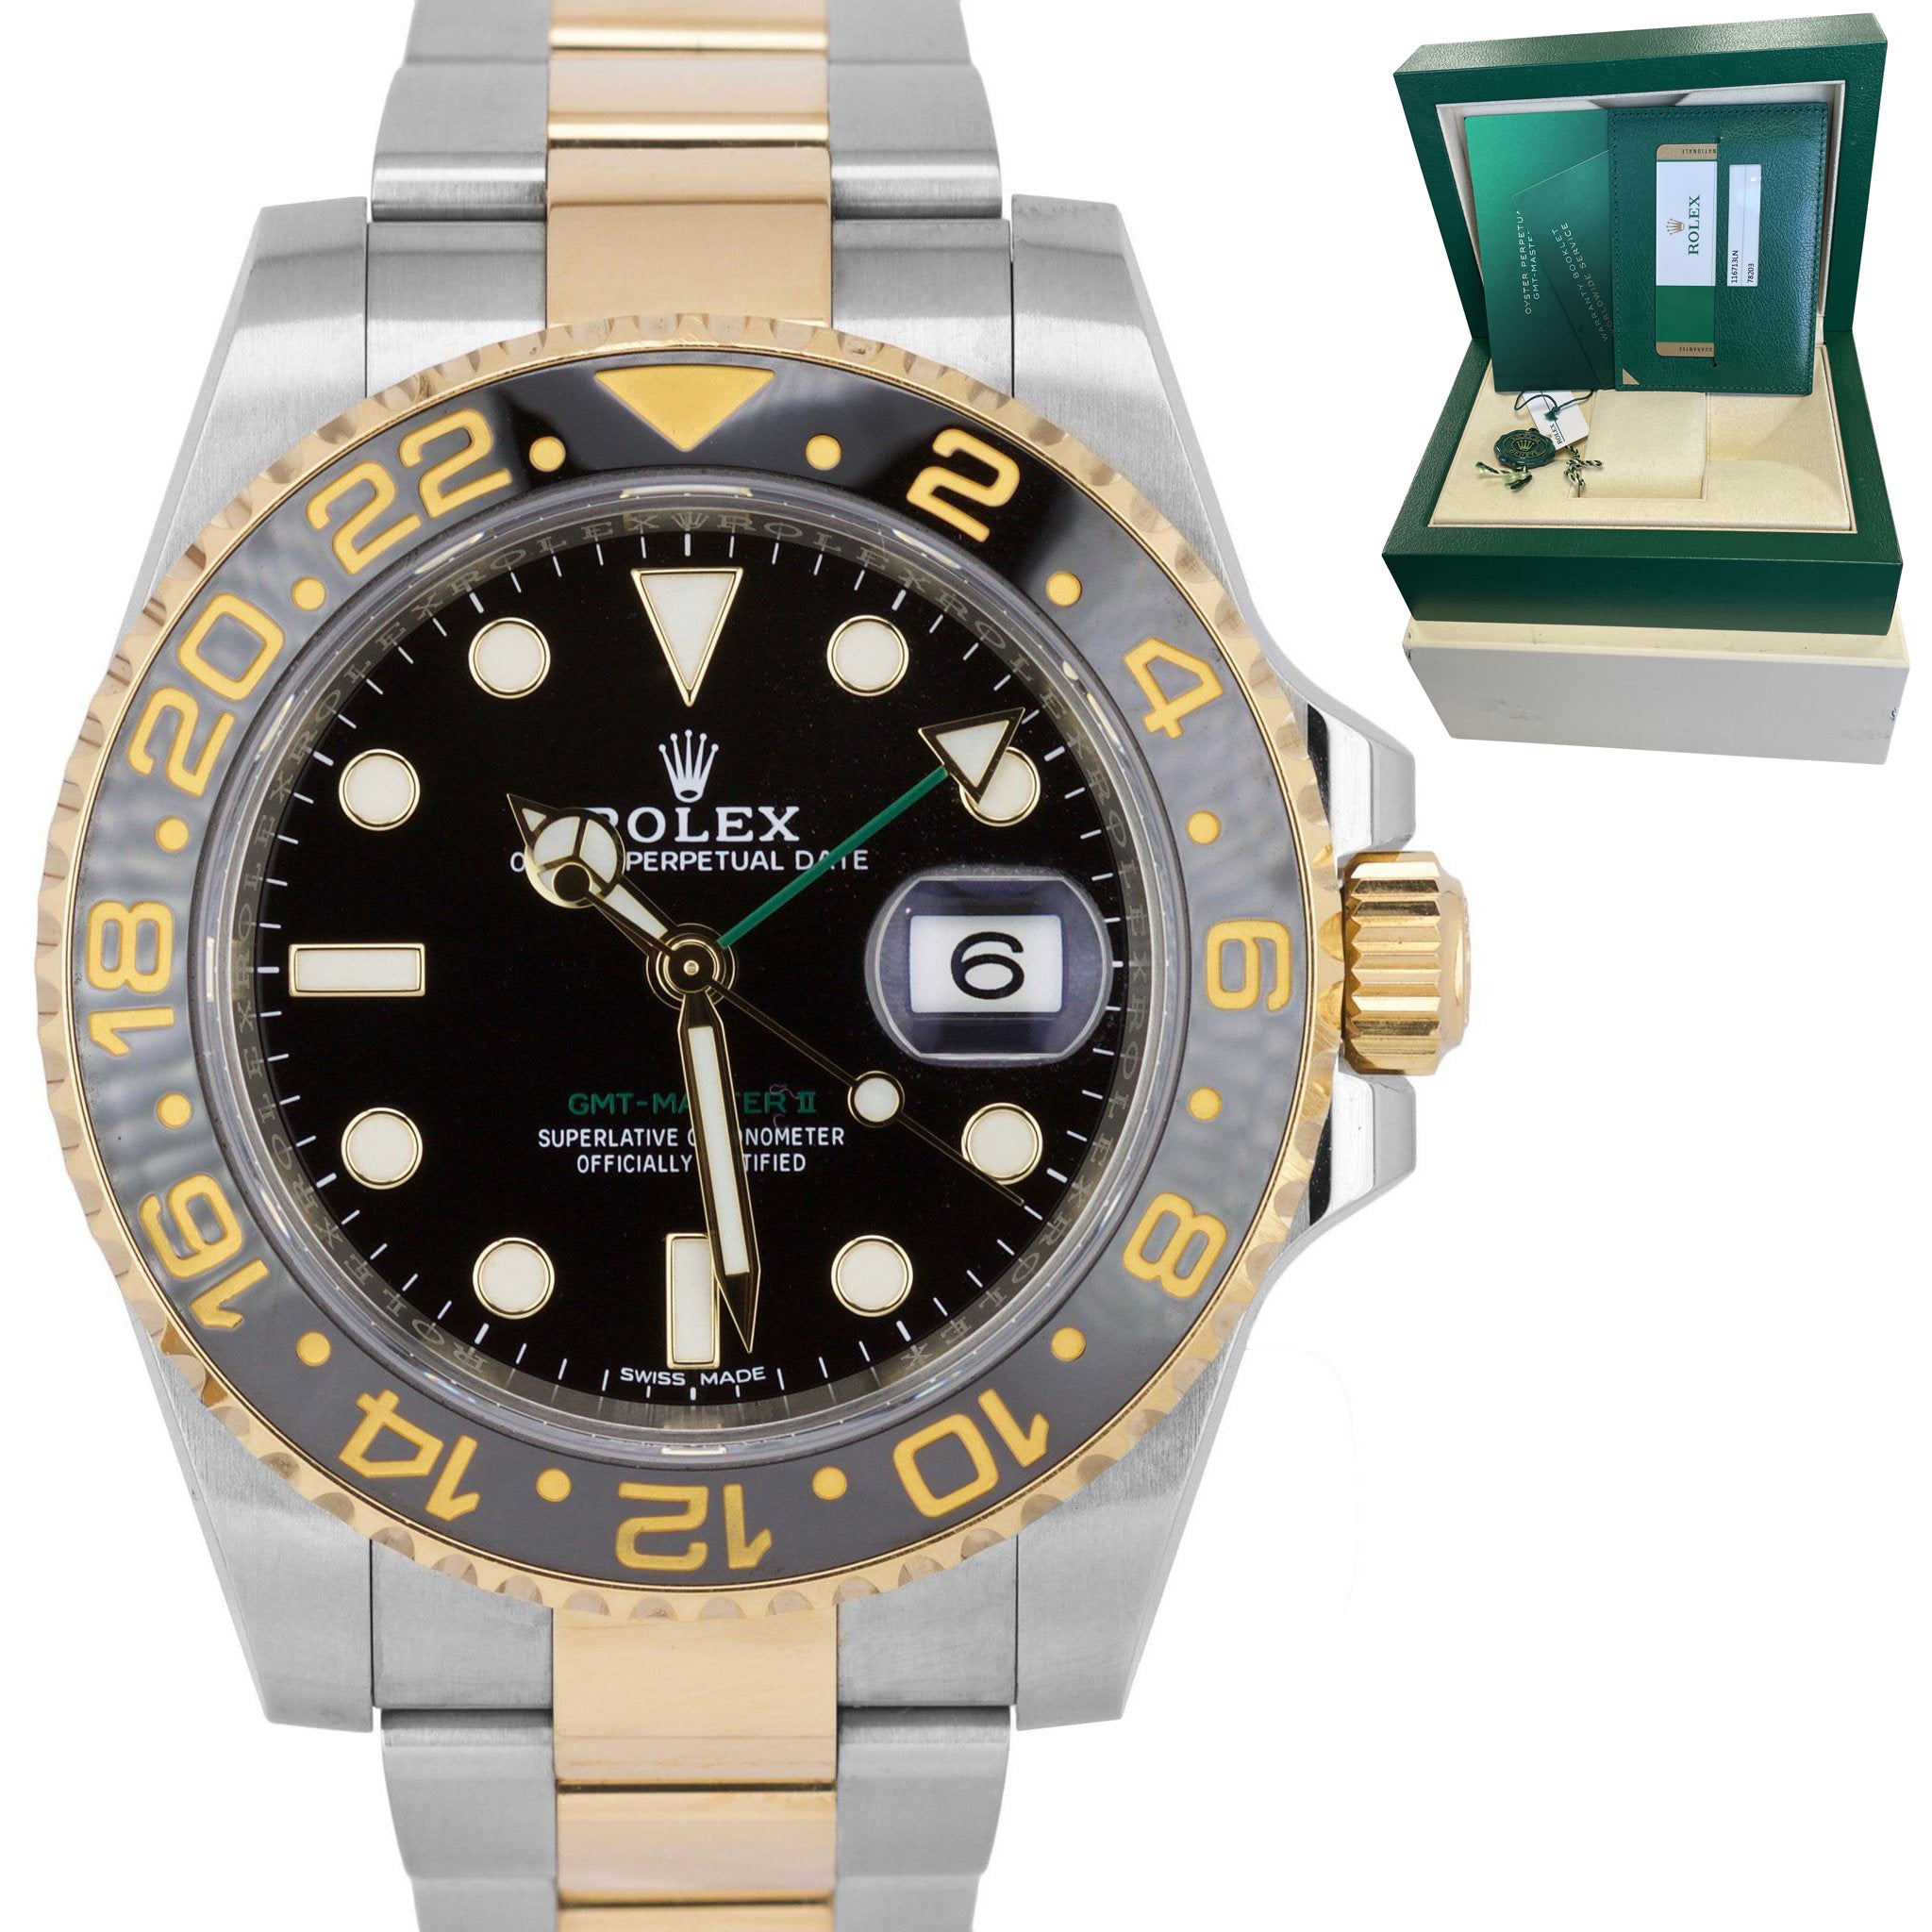 2018 Rolex GMT-Master II Ceramic 116713 Black Two-Tone Stainless Date 40mm Watch